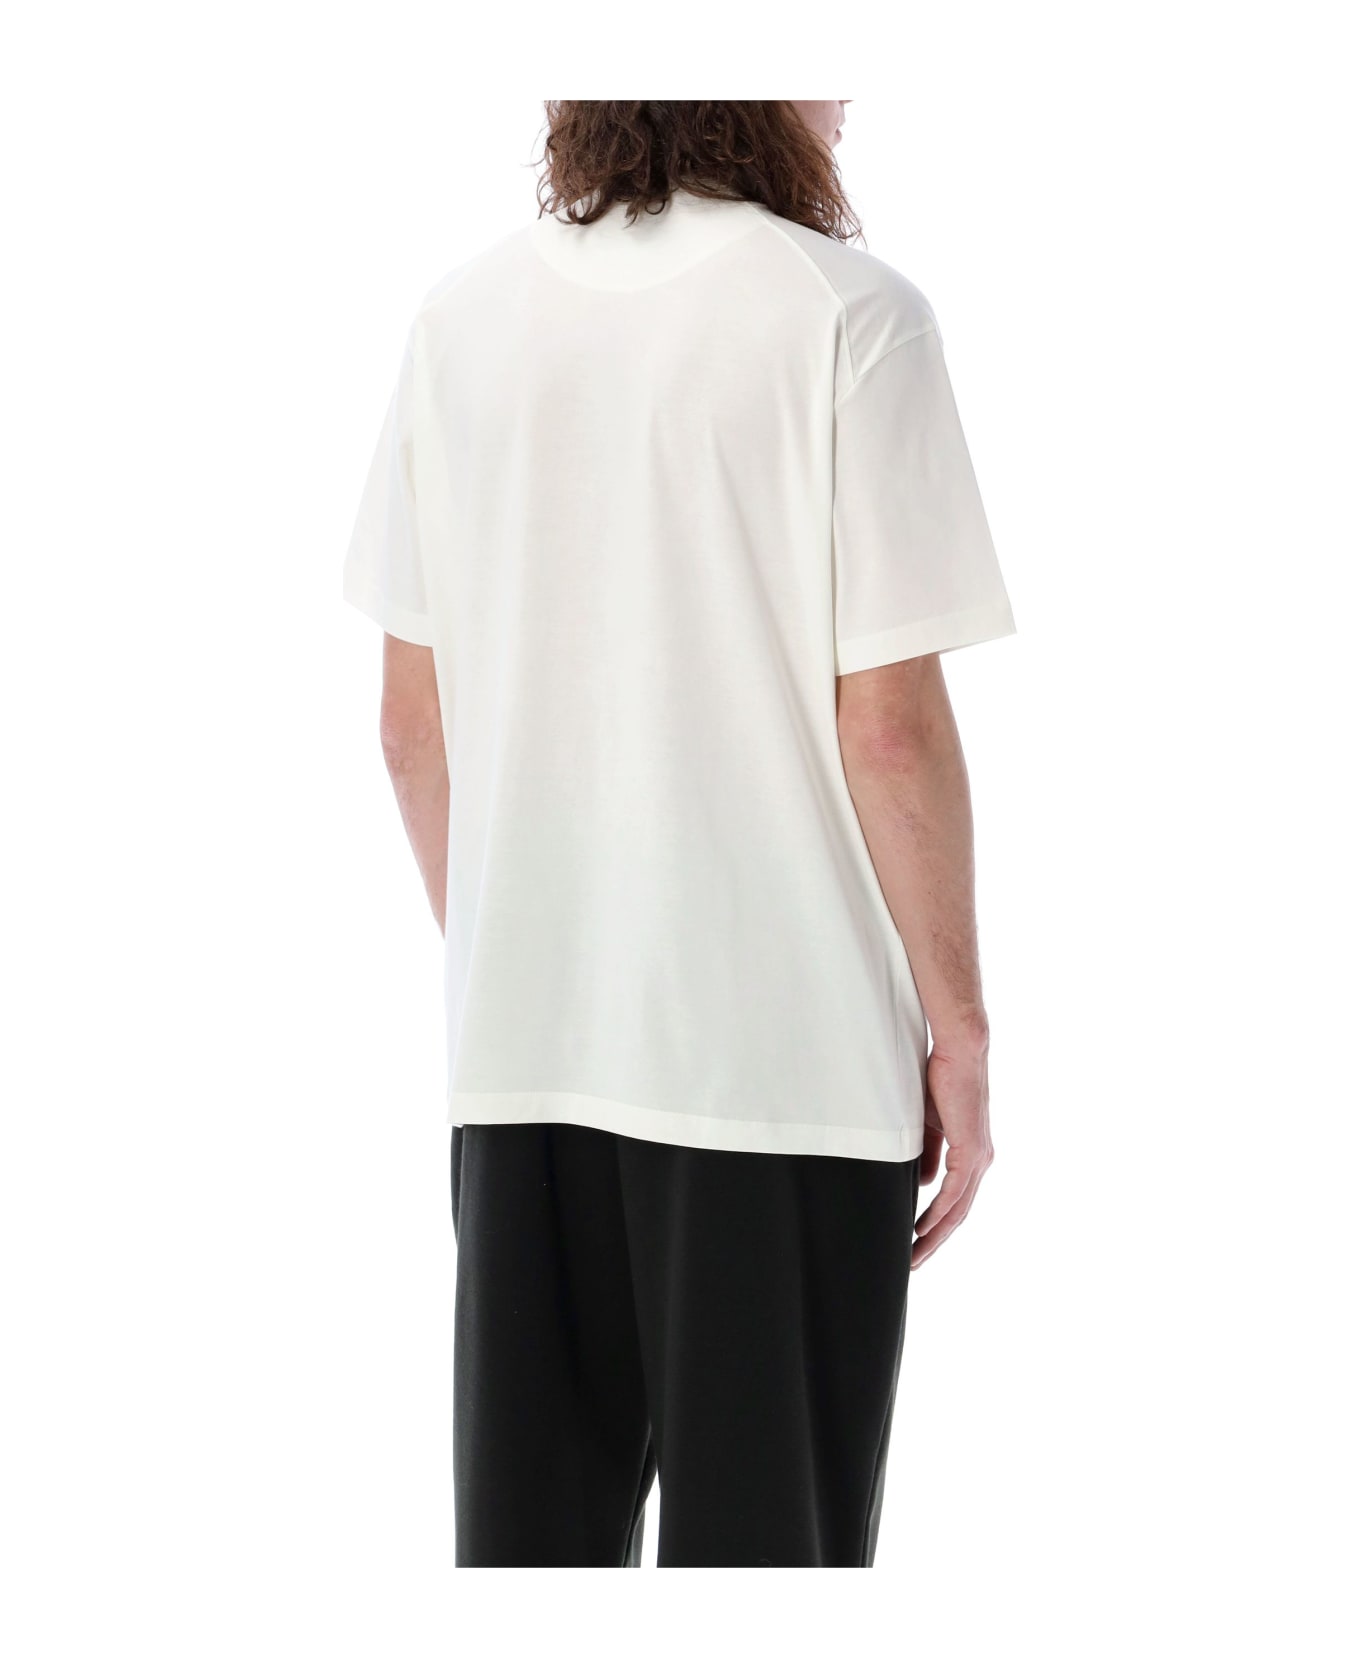 Y-3 Graphic Short Sleeves Tee - WHITE Tシャツ